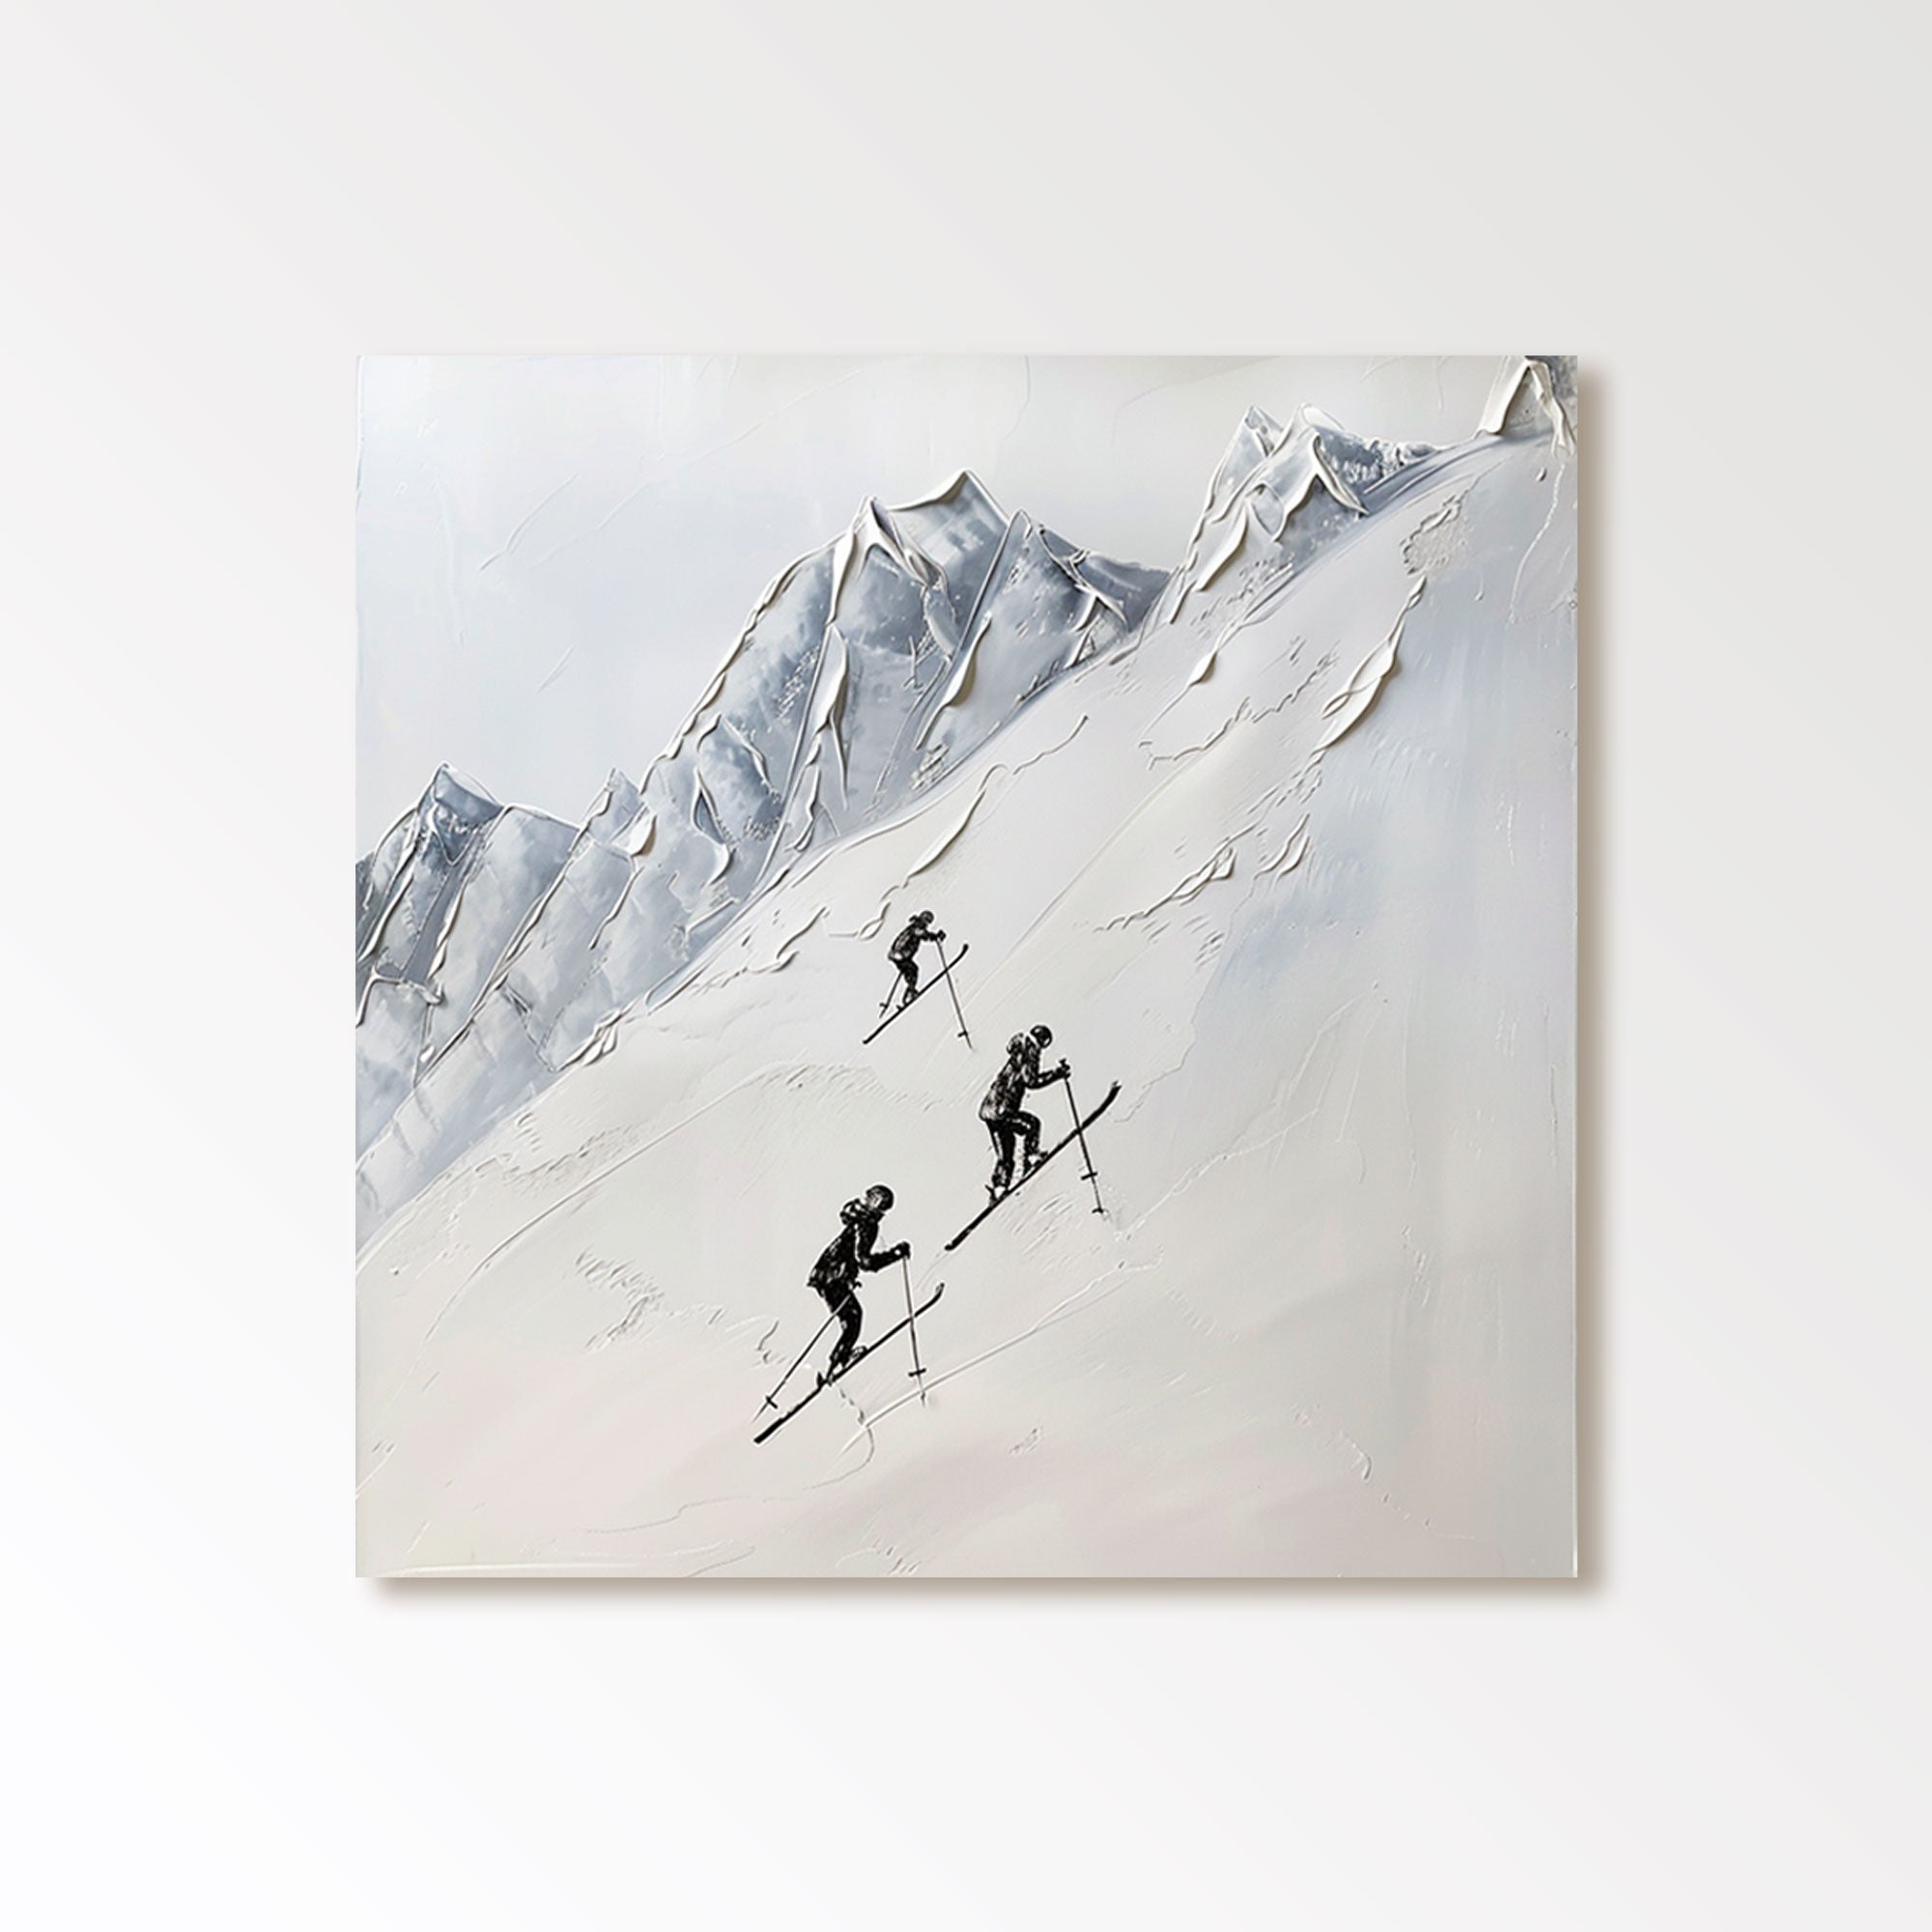 Plaster Painting "Together Towards the Summit"